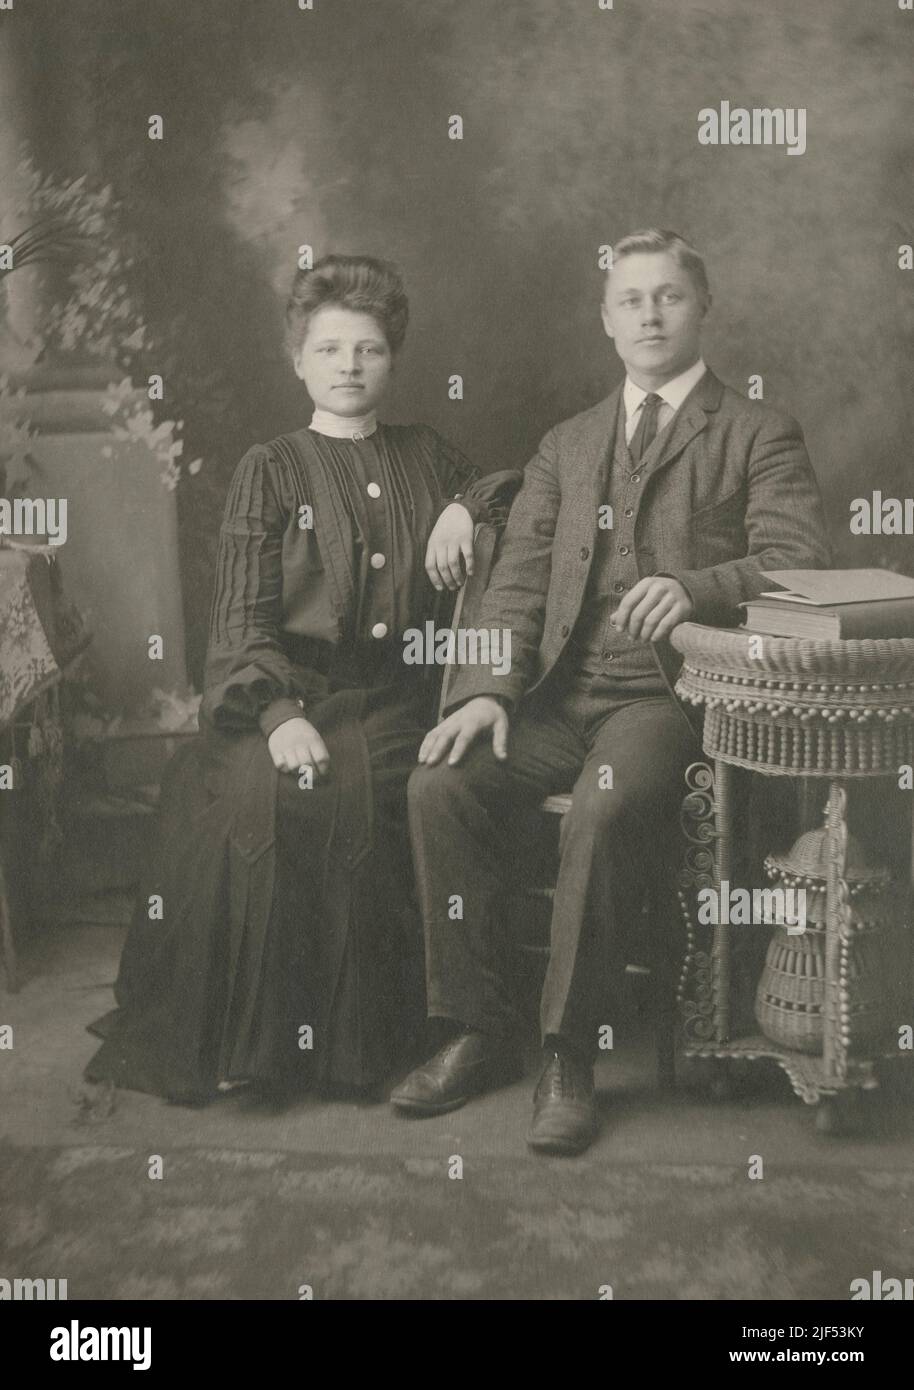 Antique circa 1890s photograph of a young unmarried couple in or near Fitchburg, Massachusetts, USA. The same couple appears married with rings in Alamy photo #2JF53MX. SOURCE: ORIGINAL PHOTOGRAPHIC CABINET CARD Stock Photo